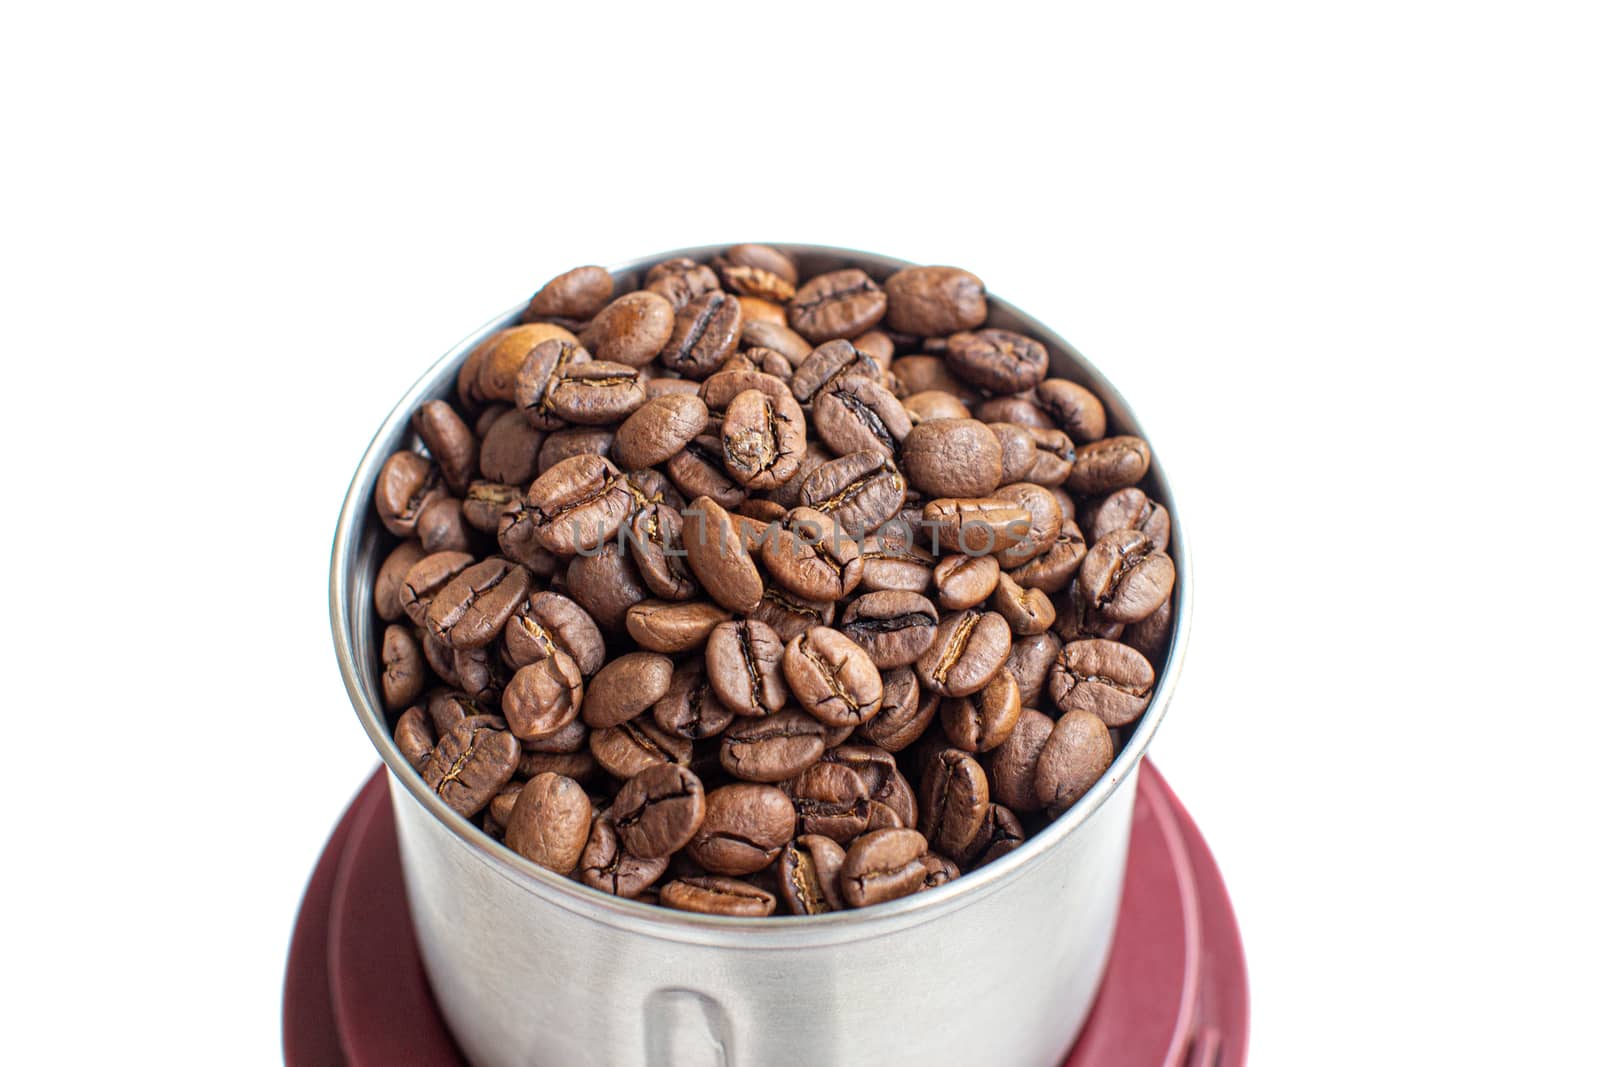 A lot of coffee beans in a metal coffee grinder on a white background. Isolated.